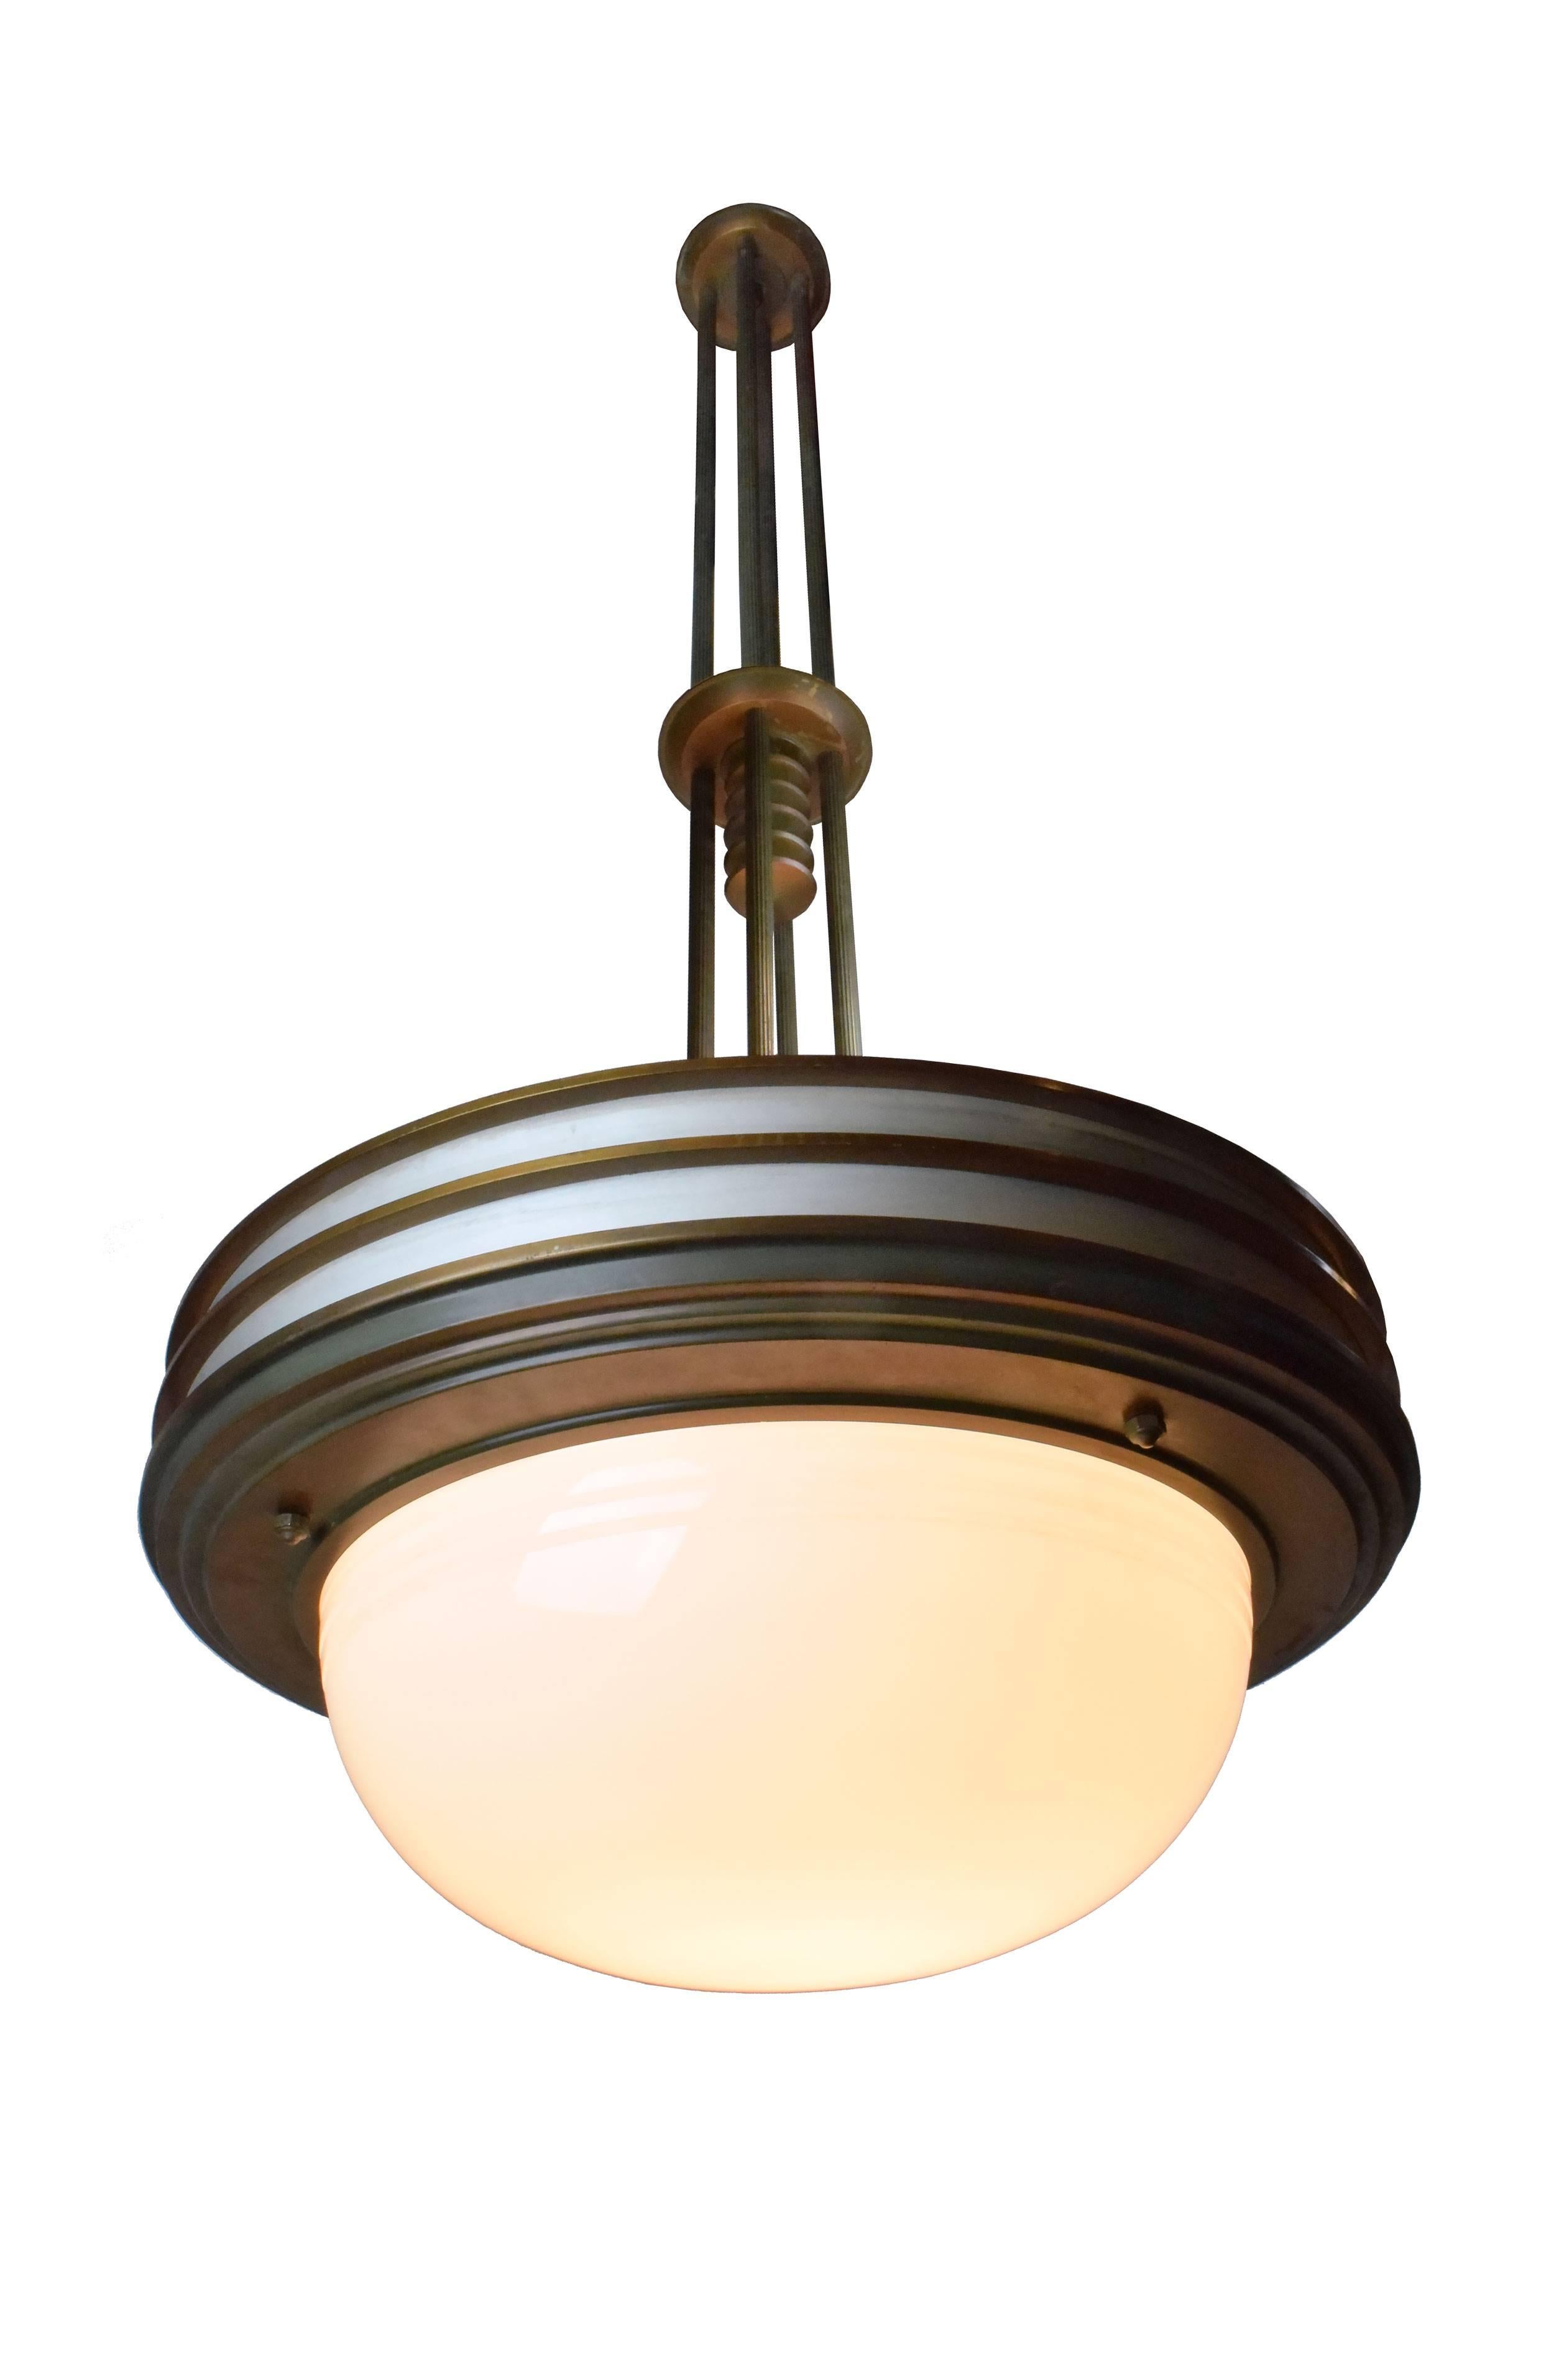 These incredible chandeliers epitomize the streamlined, geometric lines of the Art Deco movement. Four ribbed, cylindrical brass rods suspend each fixture over feet in the air and from these a tiered pendant holds a huge etched glass bowl in place. 